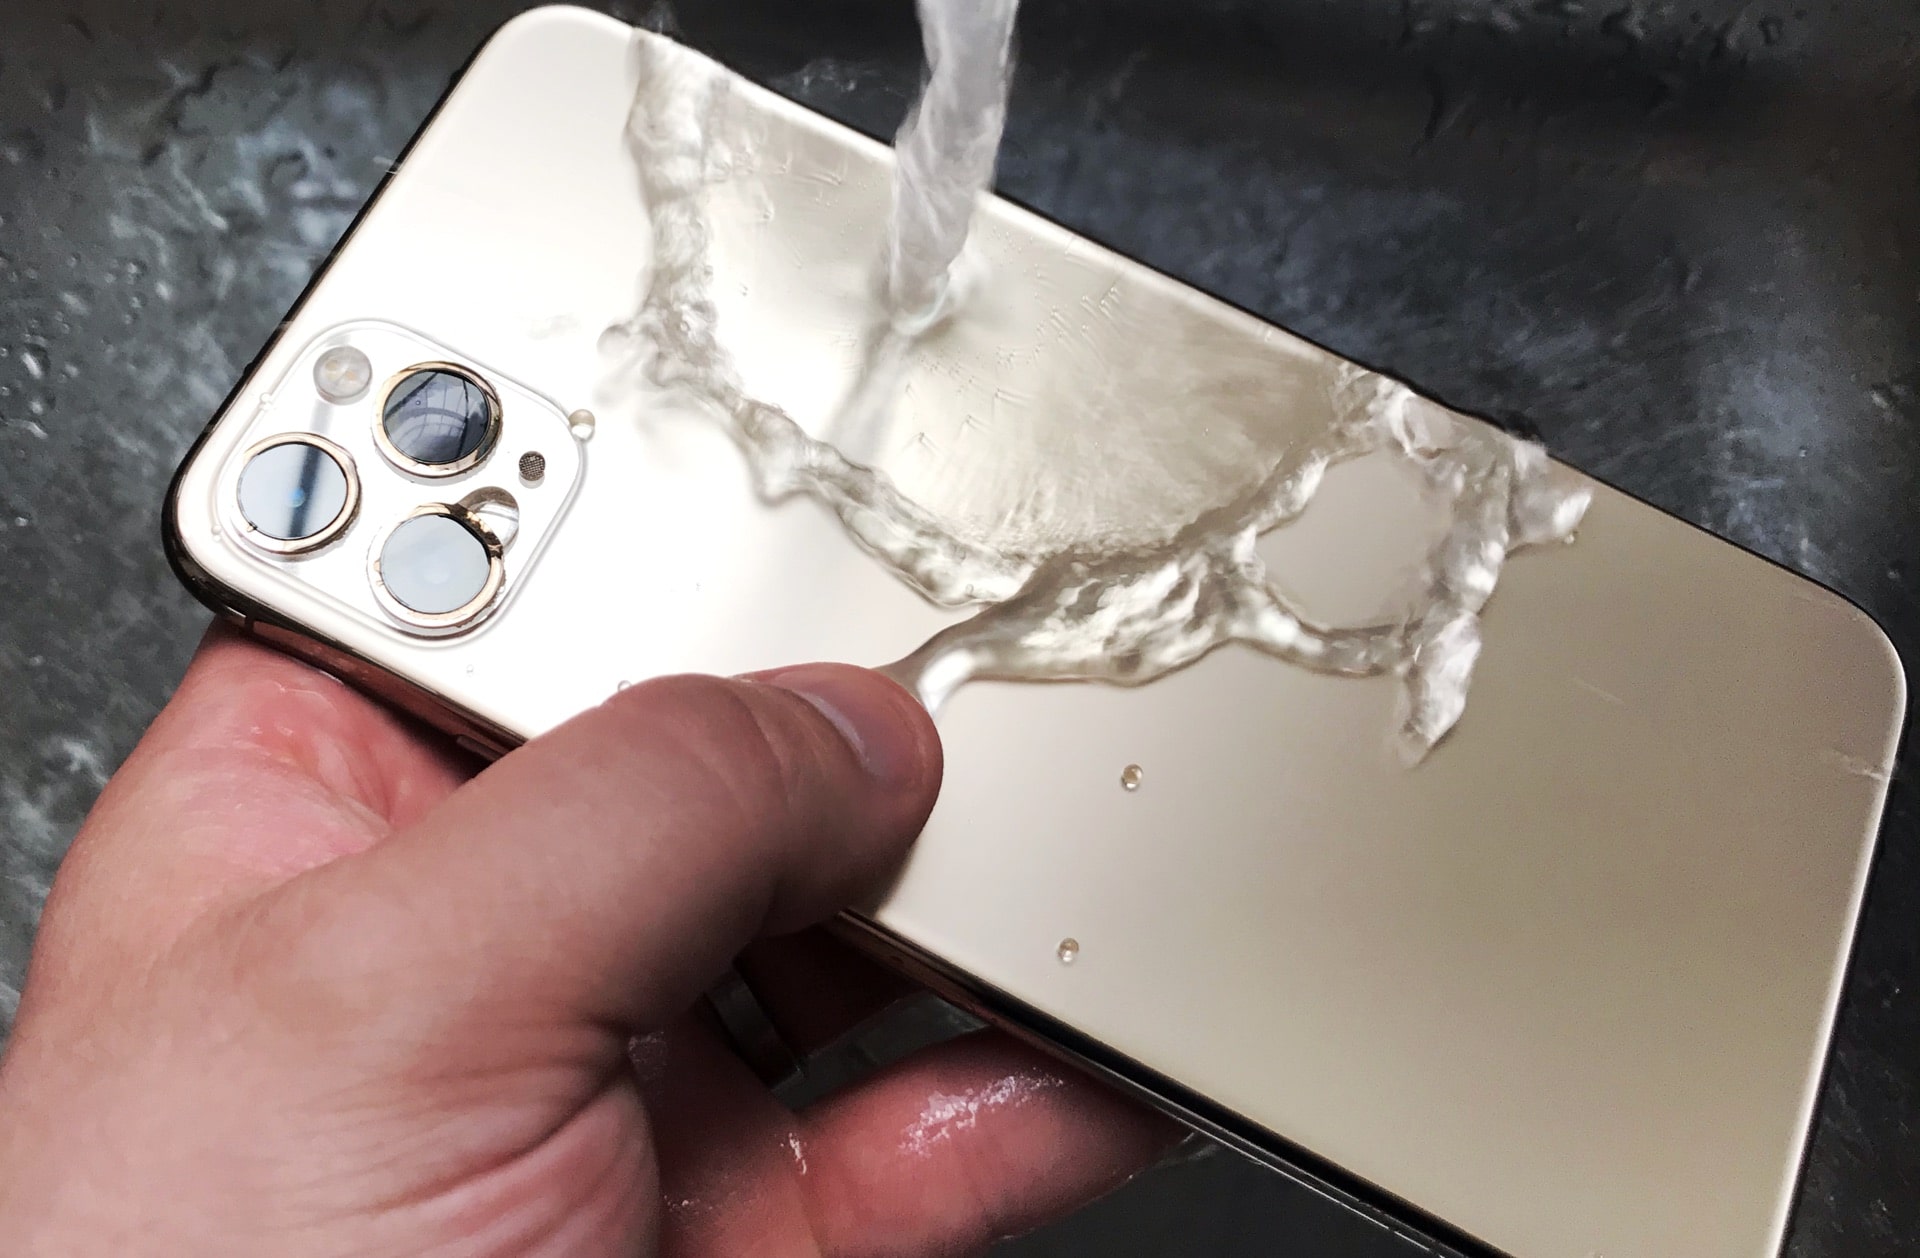 Washing an iPhone 11 Pro Max under a tap